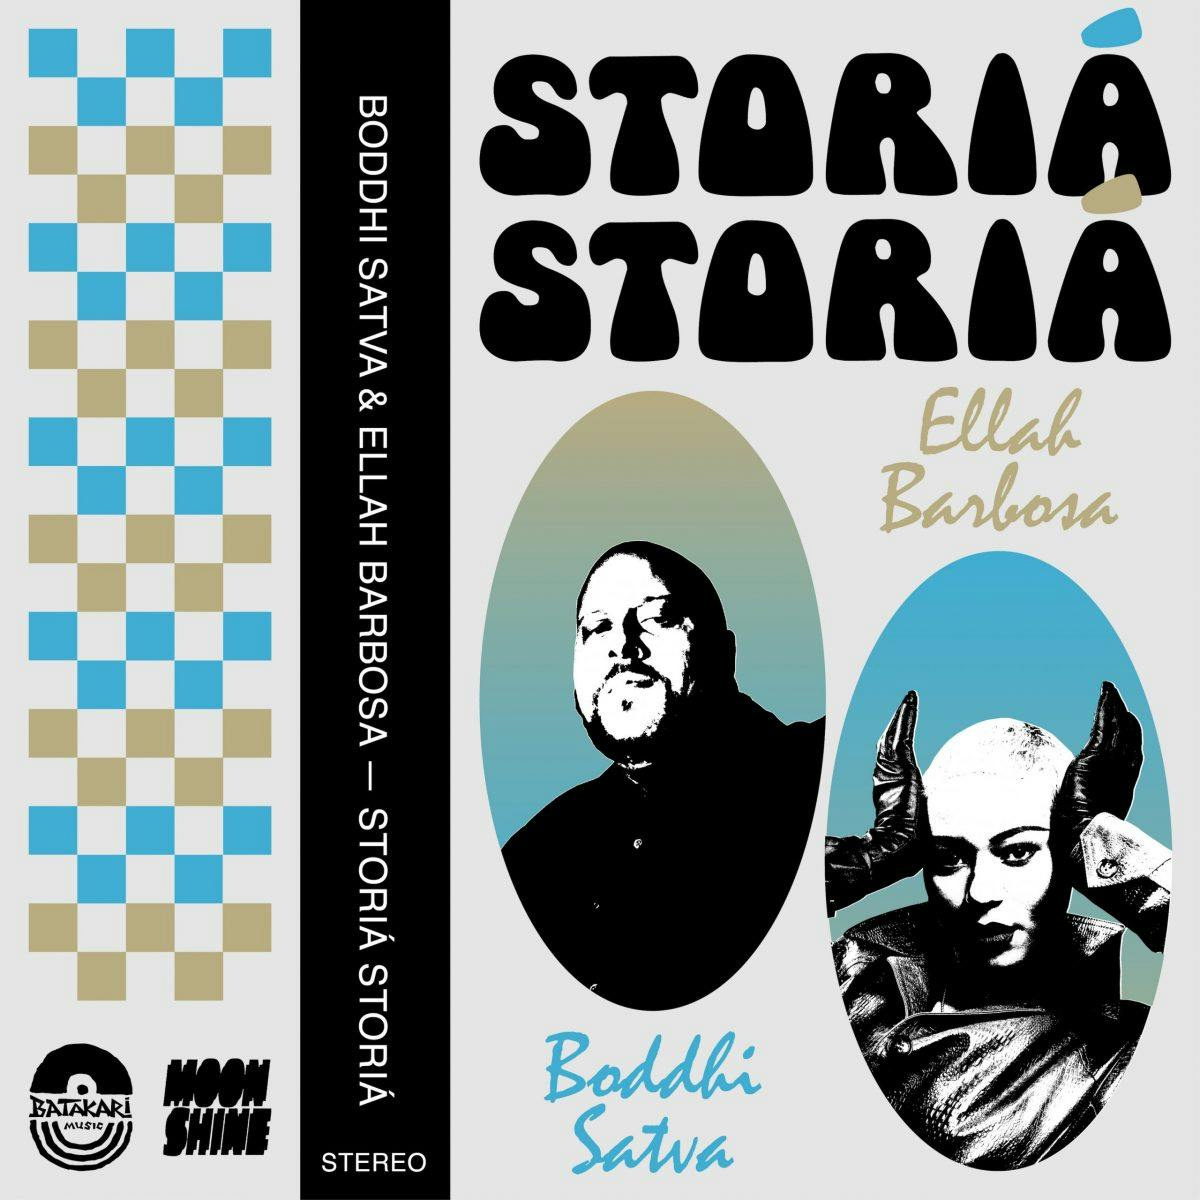 Afro House hero Boddhi Satva drops another gem from upcoming album ‘Manifestation’ in the form of ‘Storiá Storiá’, a collaboration with vocalist ÉLLÀH.